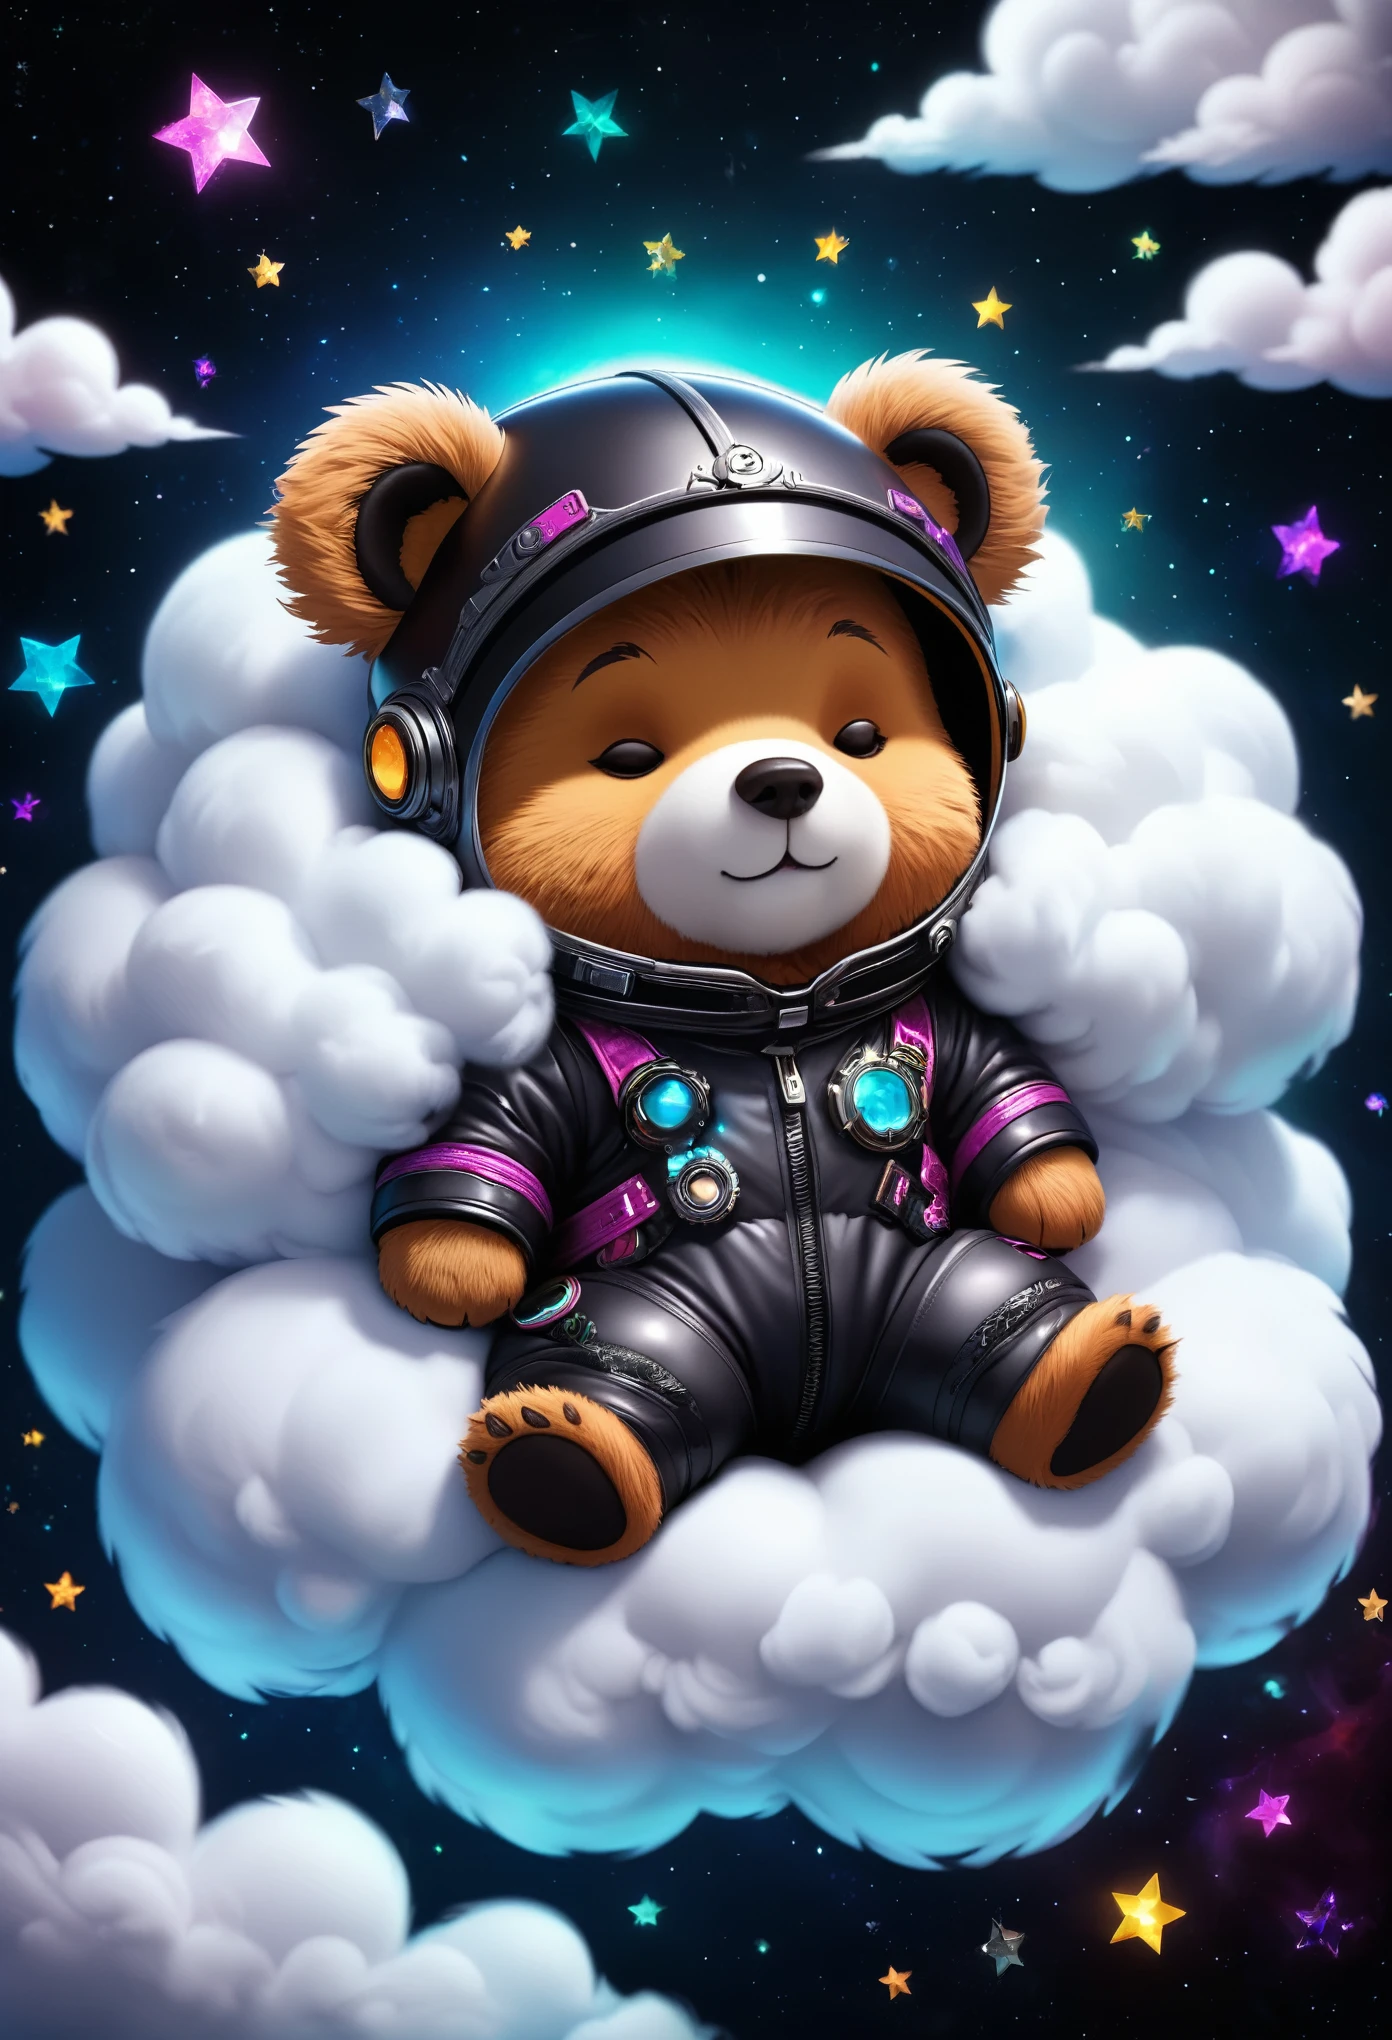 (Cute cartoon style:1.3), (((close-up of mighty bear God holding otherworldly planet))), (full sleek classic spacesuit:1.2), ((open head)), dark fur, epic space scenery, intricate design, bright colors, masterpiece in maximum 16K resolution, best quality, ultra detailed, aesthetics, absurdes.